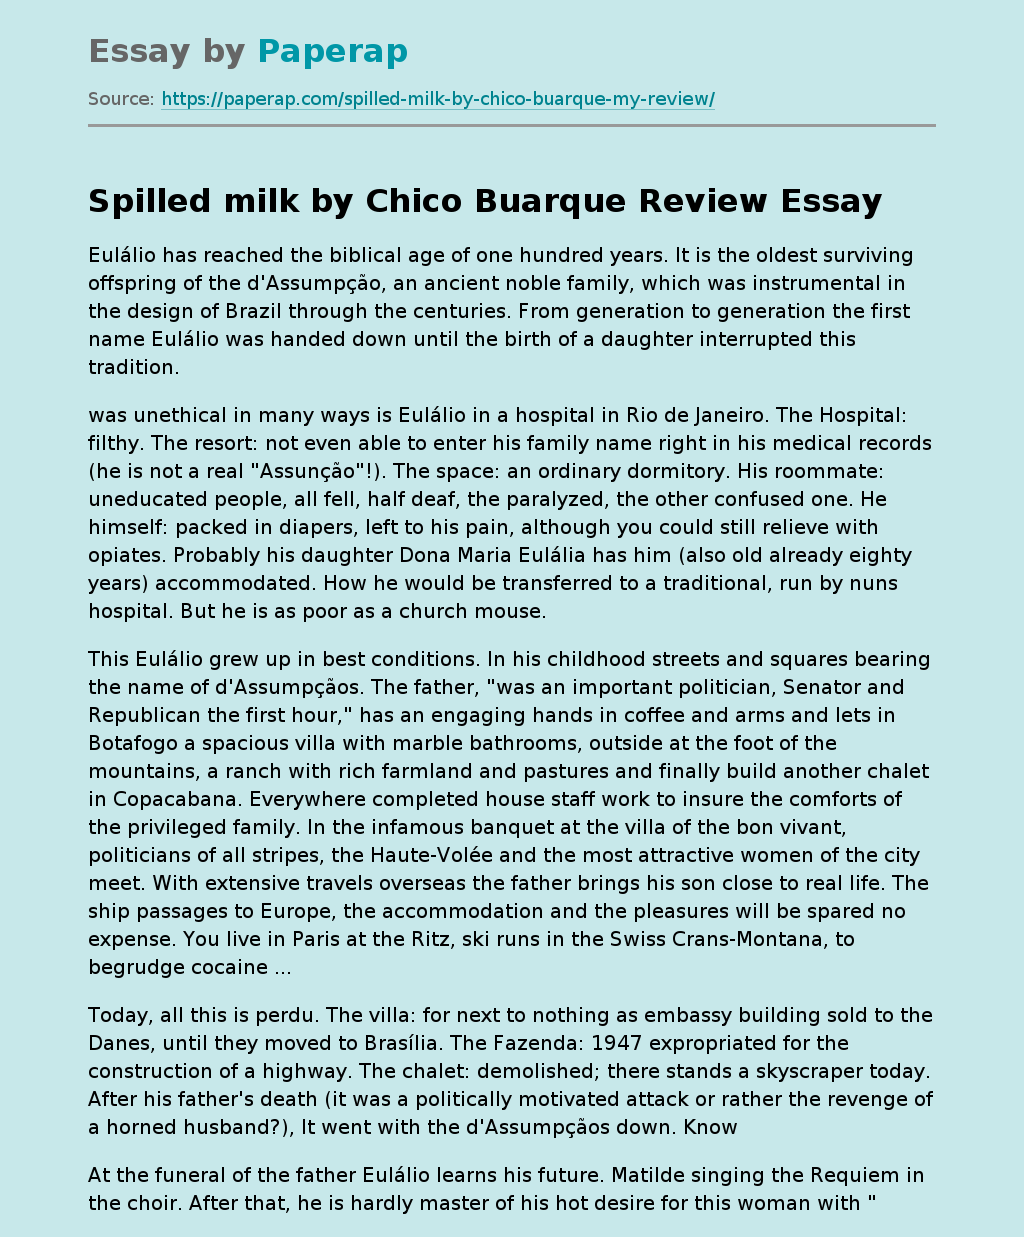 Spilled milk by Chico Buarque Review